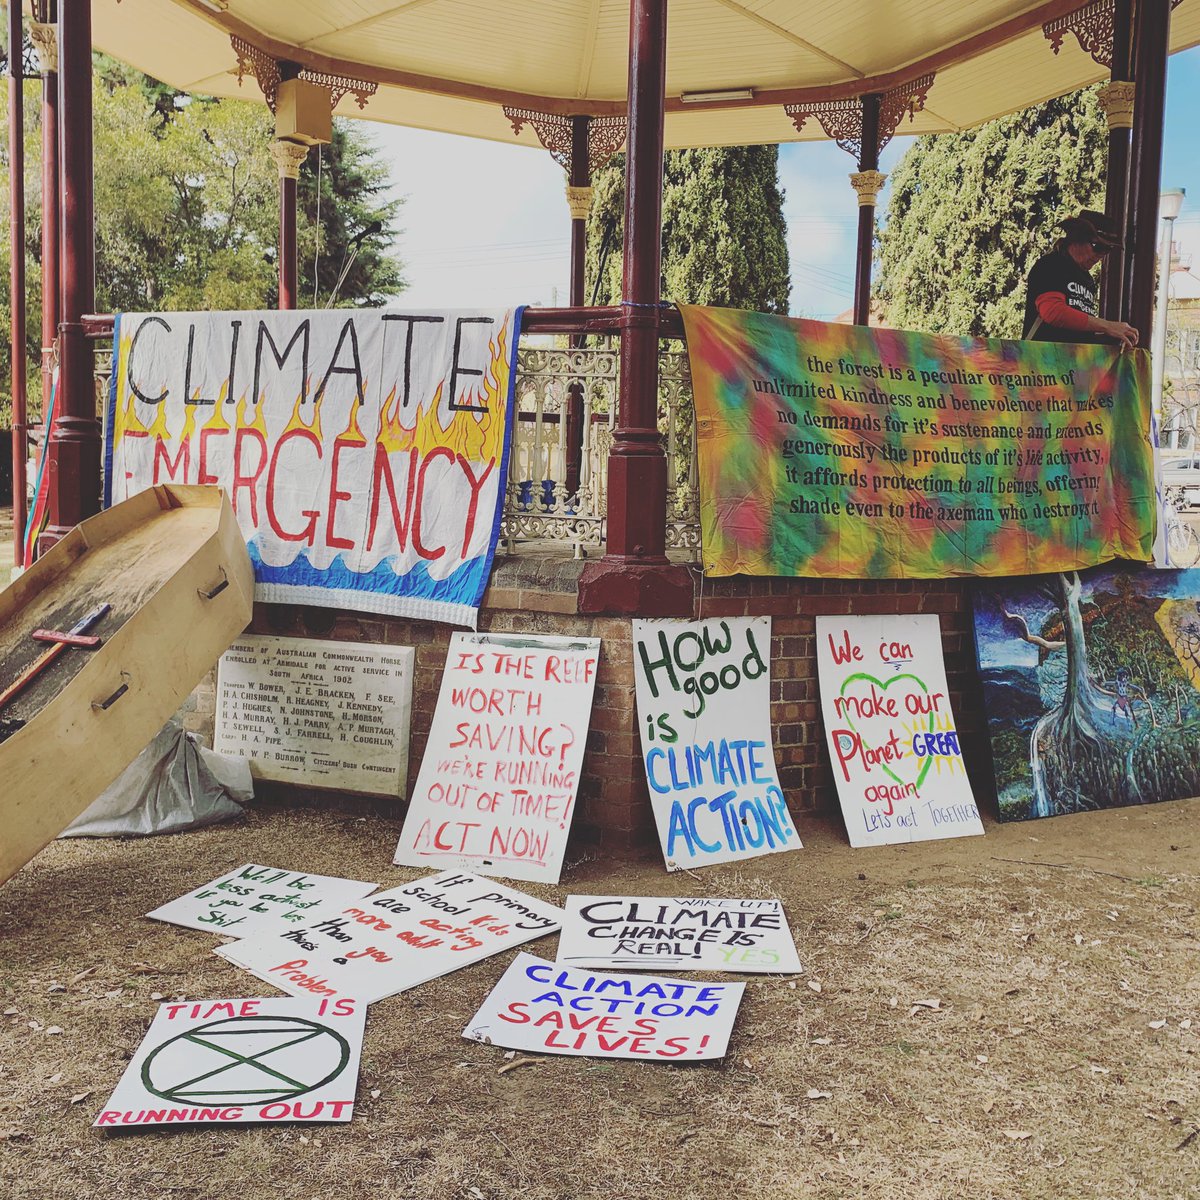 The #beginnings of a #cleanerearth ! Here in #ARMIDALE NSW preparing to rally for #climateaction from our local council @armidaleregionalcouncil and  @australiangovernment #nomoreglobalwarming #nocoal #coalisdead #strike4climate #climateaction #studentstrike